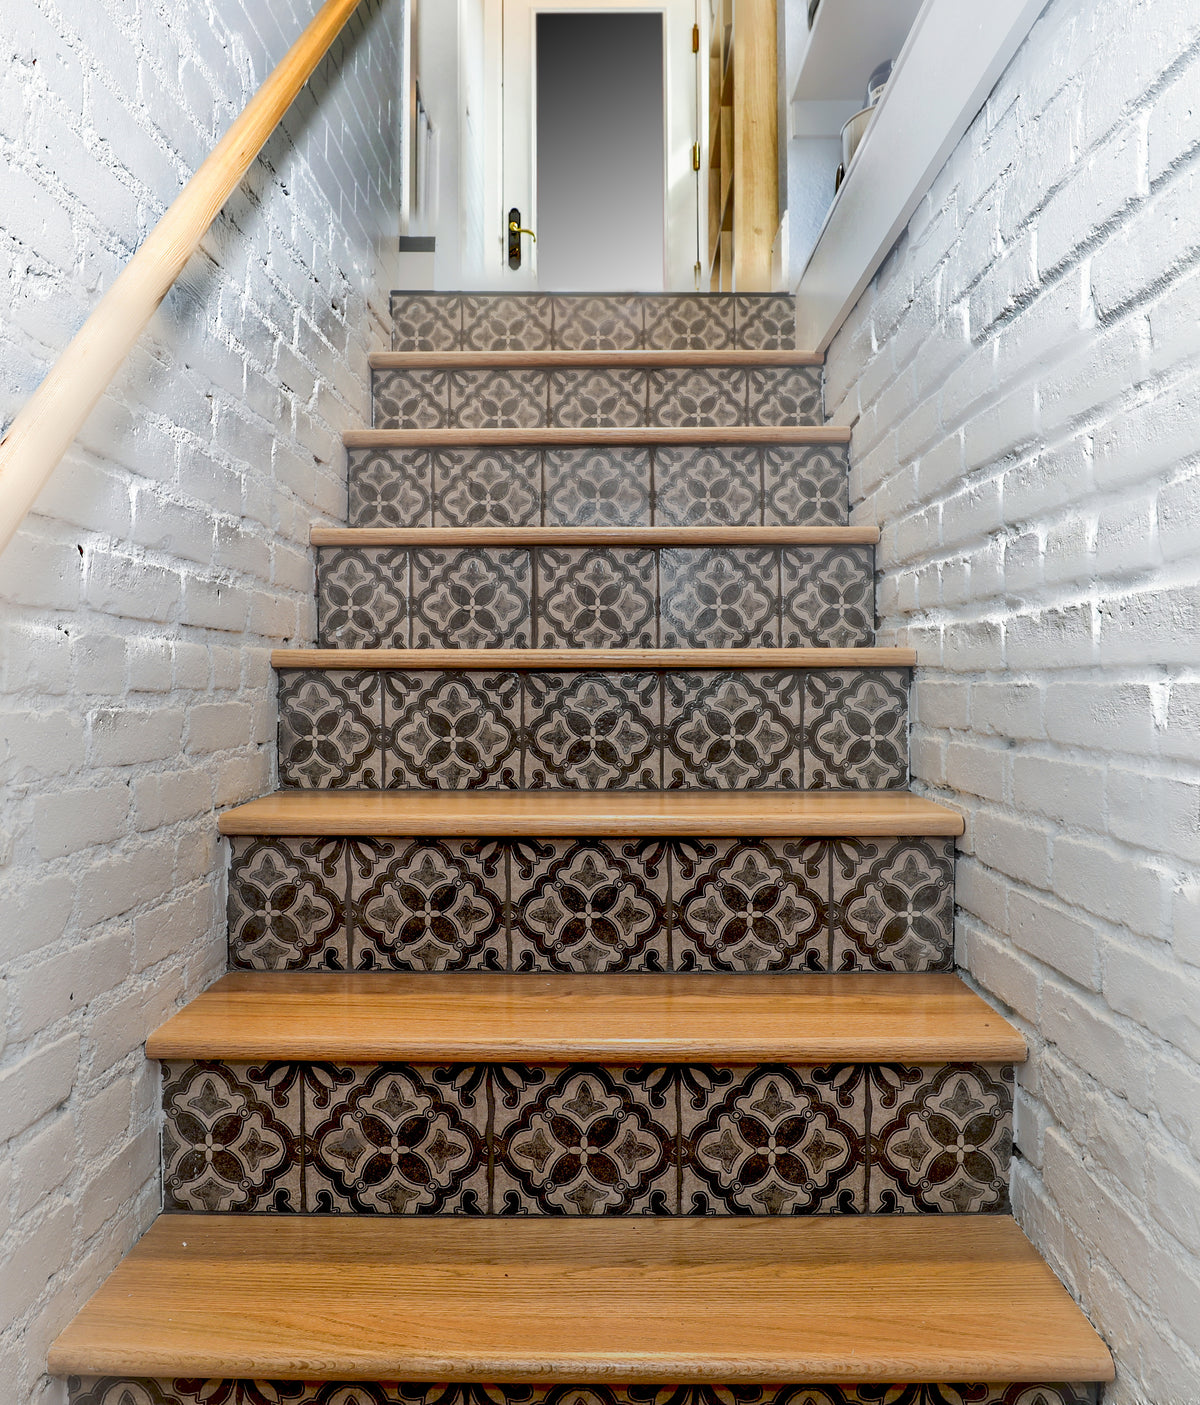 patterned tiles on stairs